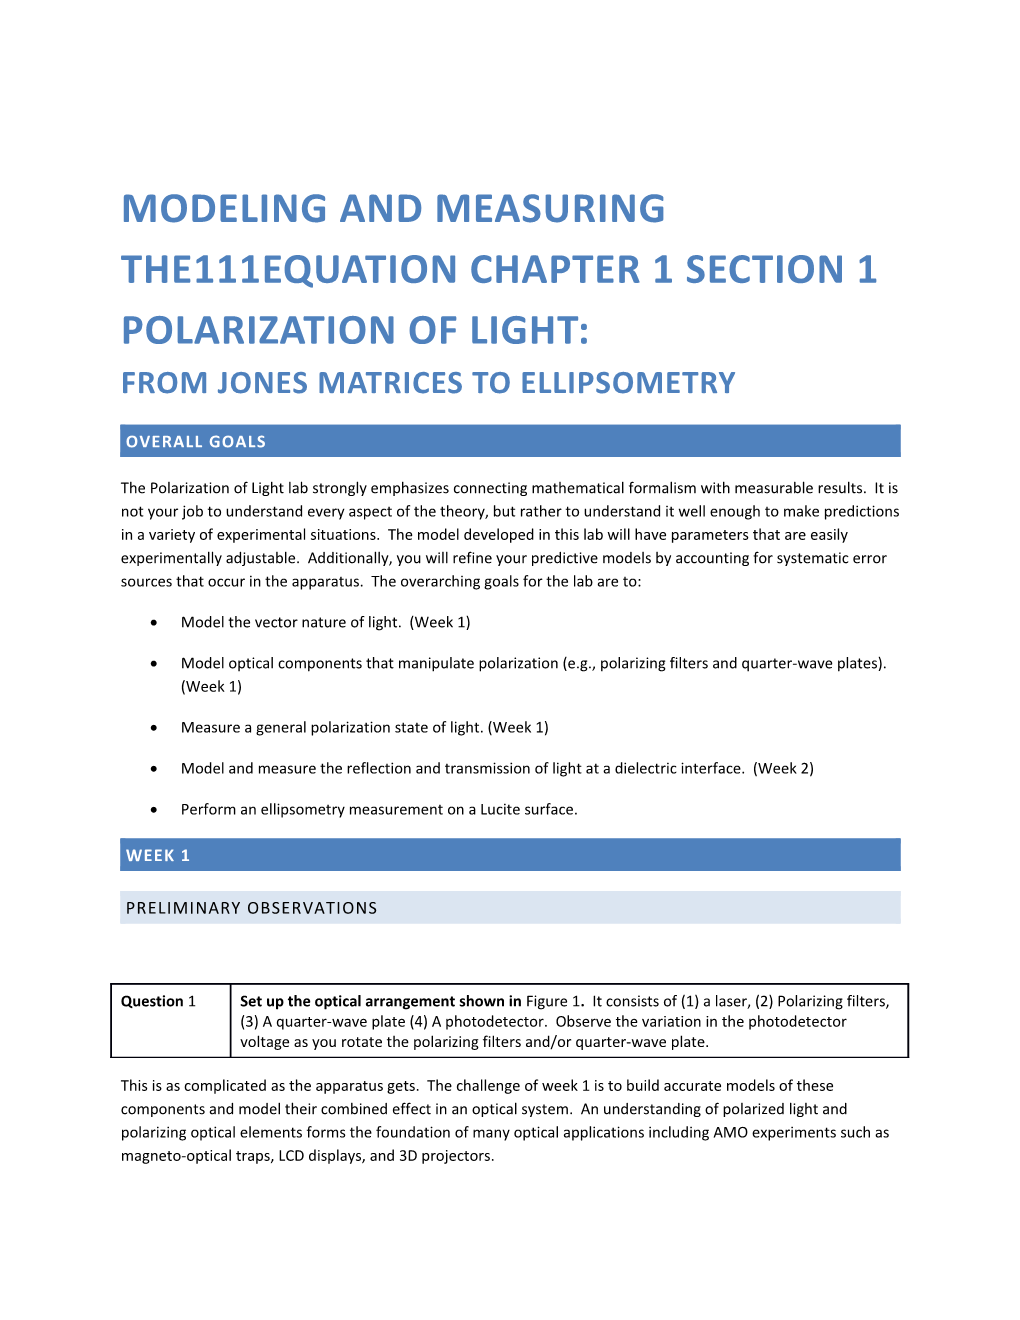 Modeling and Measuring Theormat Polarization of Light: from Jones Matrices to Ellipsometry